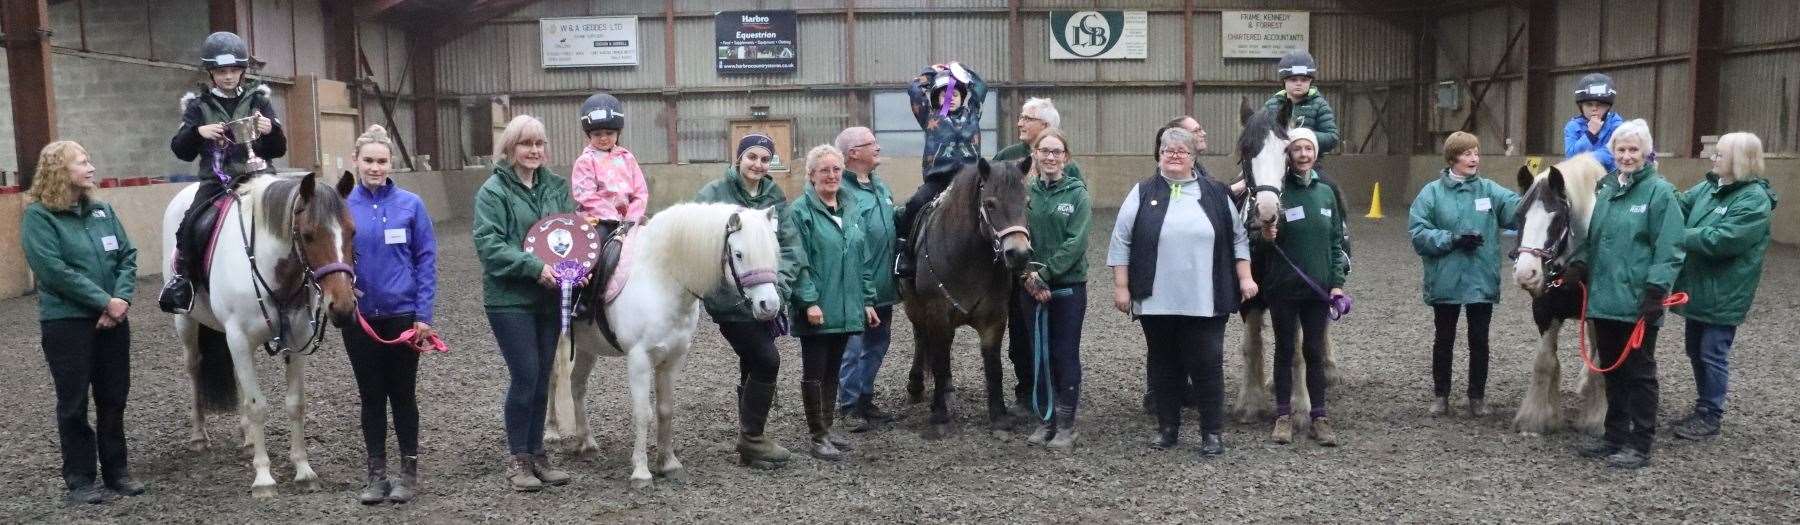 Ride three at the Caithness RDA prize-giving in the Halkirk indoor riding centre. Picture: Neil Buchan